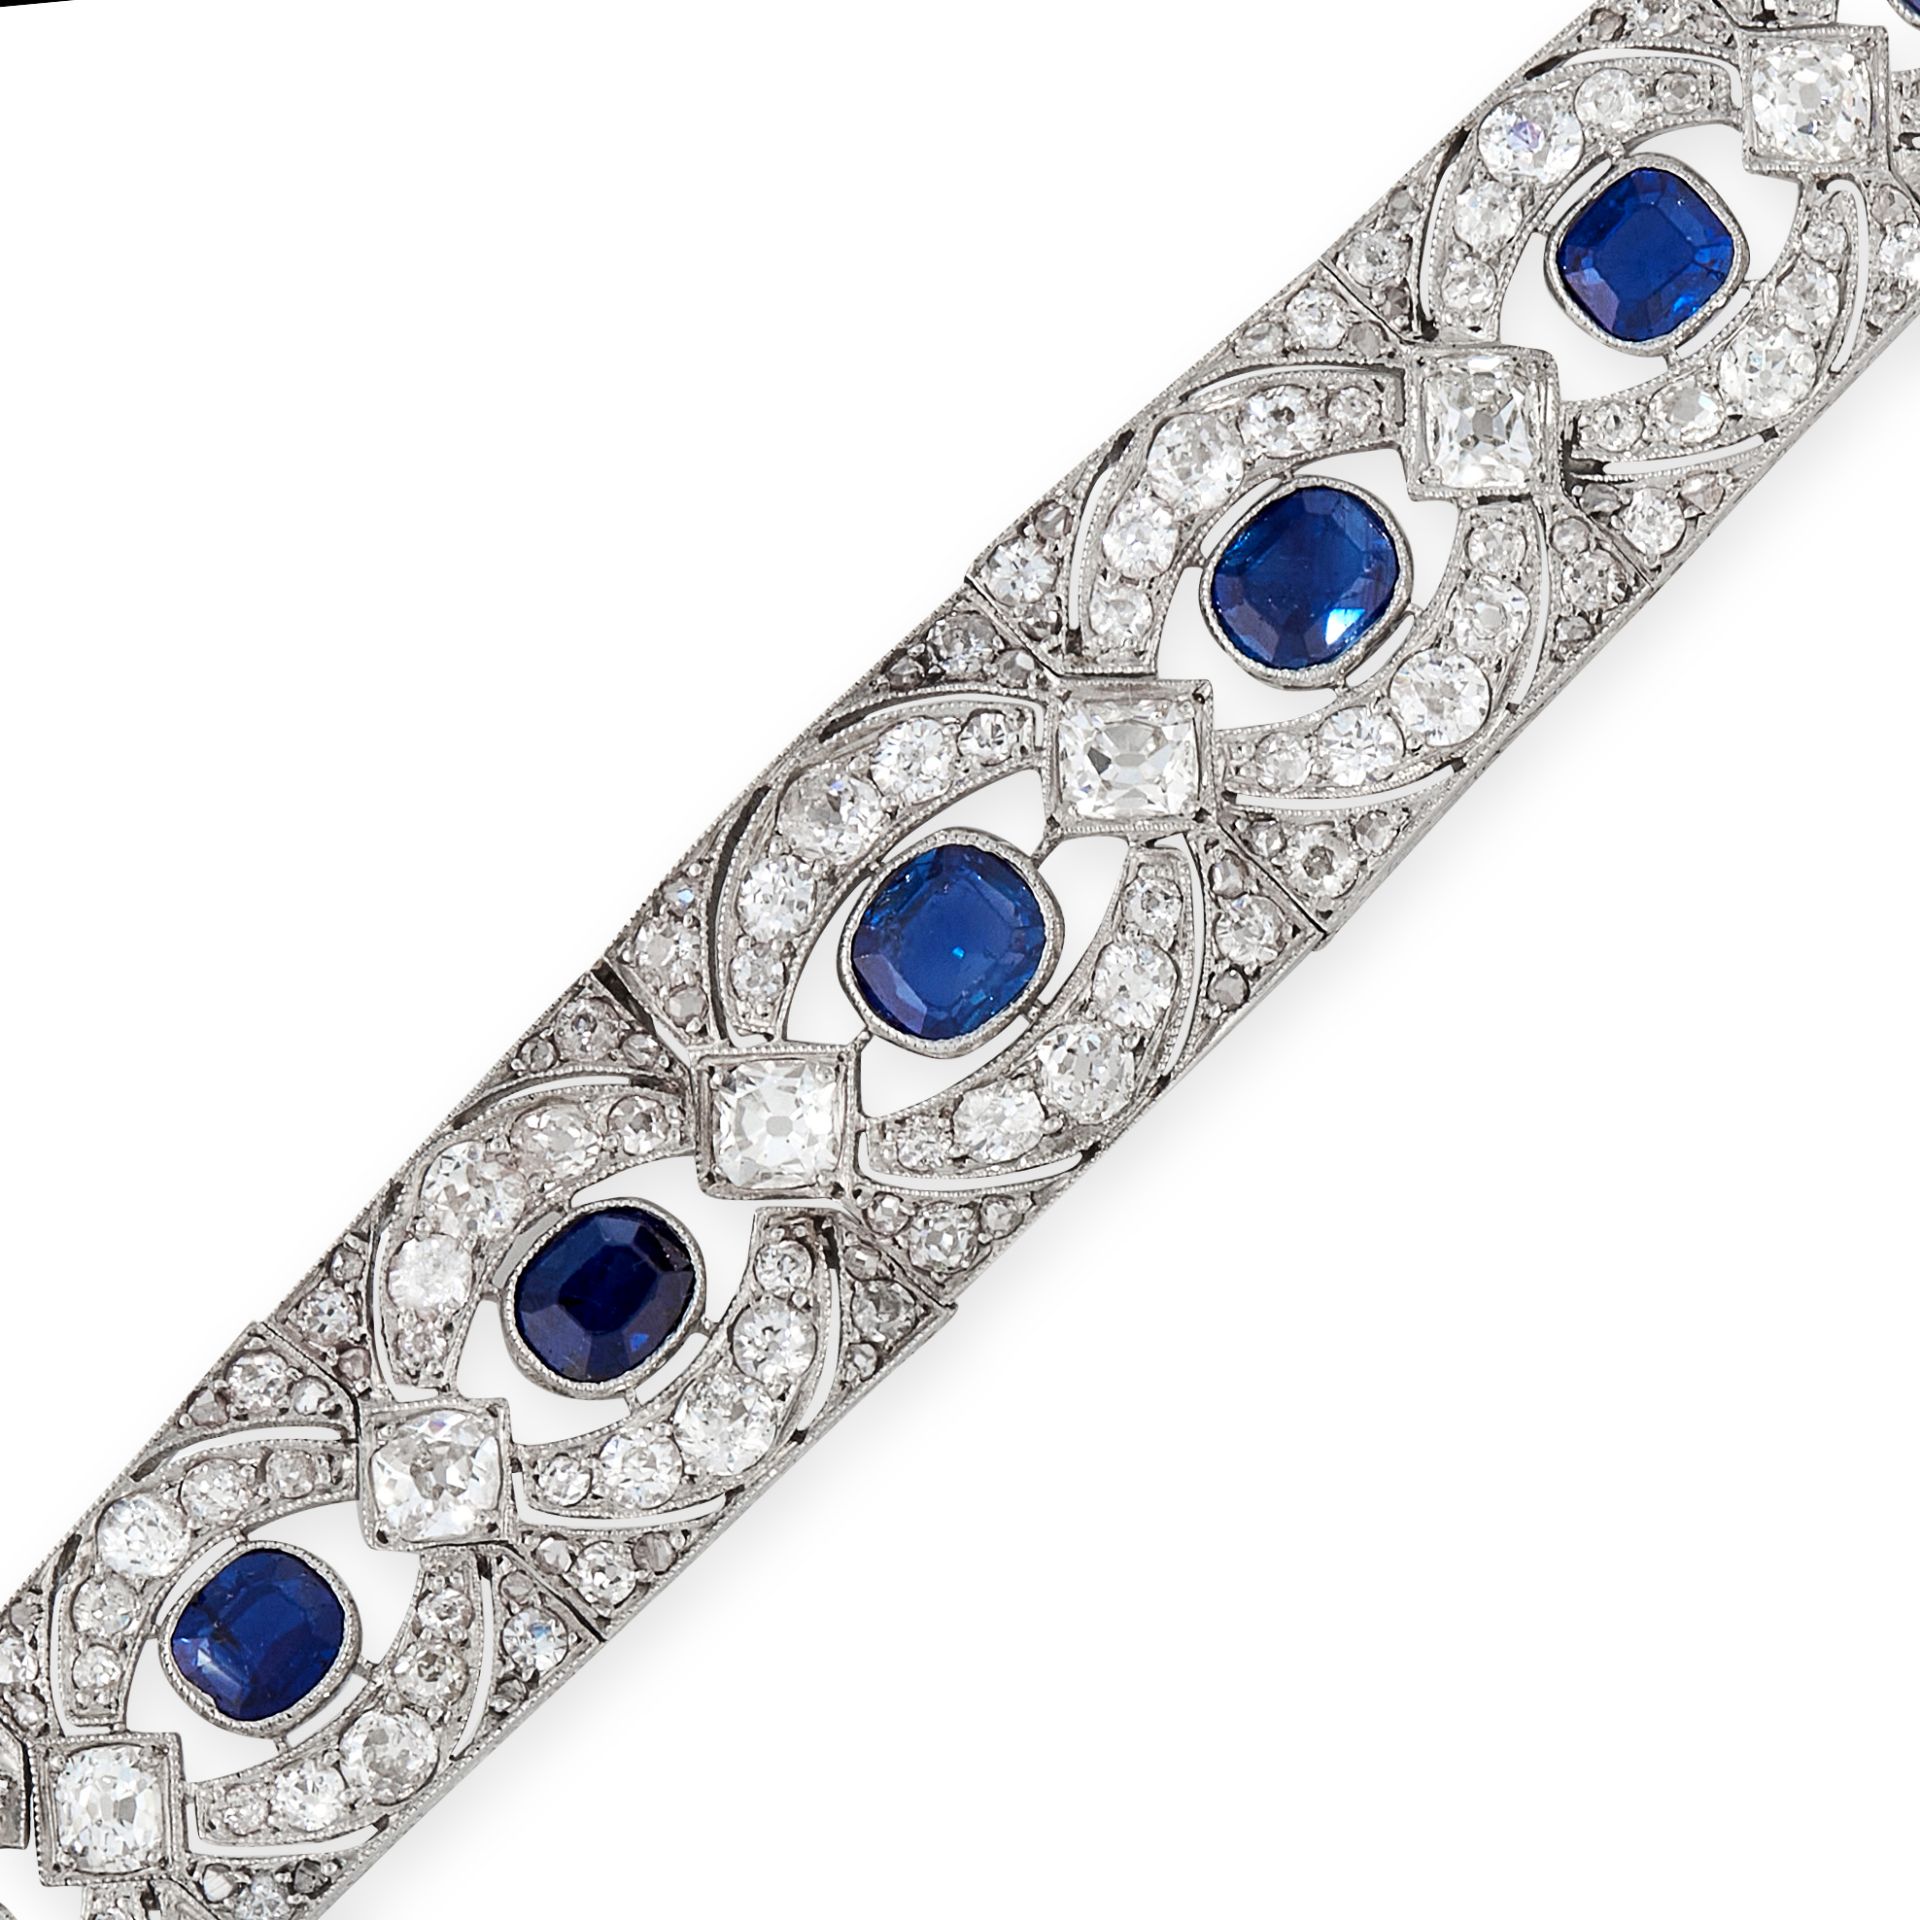 AN ART DECO SAPPHIRE AND DIAMOND BRACELET, CIRCA 1930 the tapering body formed of articulated links, - Image 2 of 2